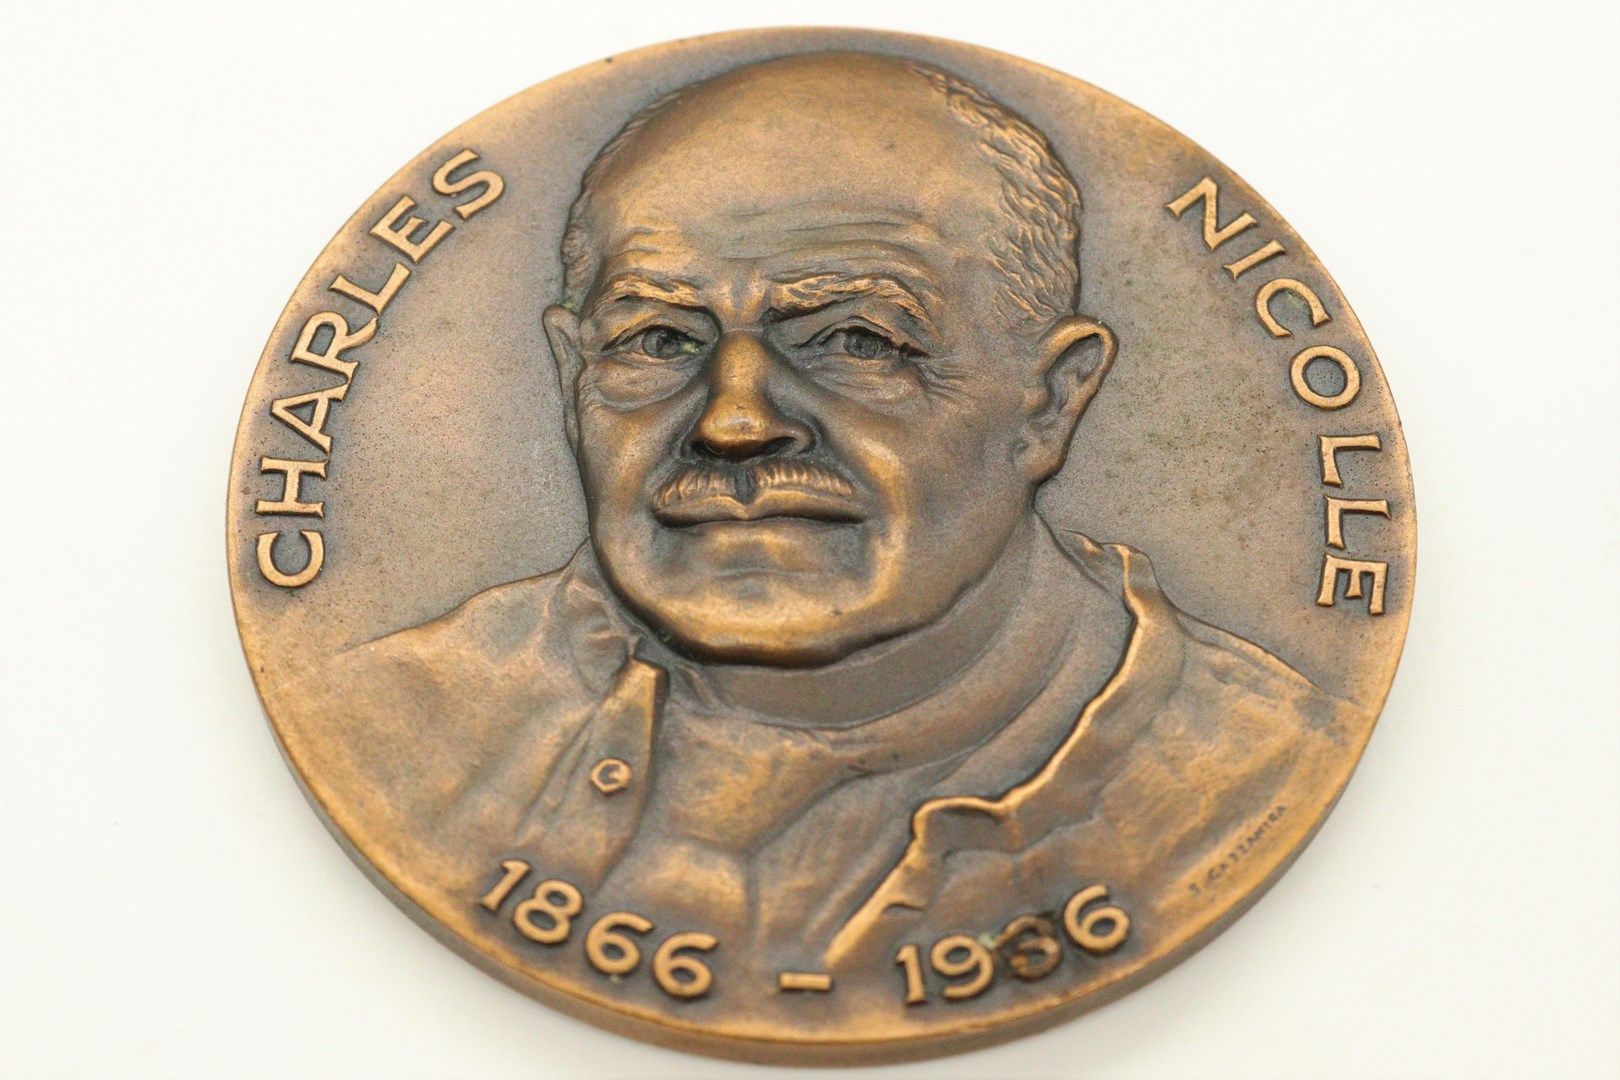 Null Medal of table in bronze

Obverse: CHARLES NICOLLE, in bust 1866-1966, sbd &hellip;